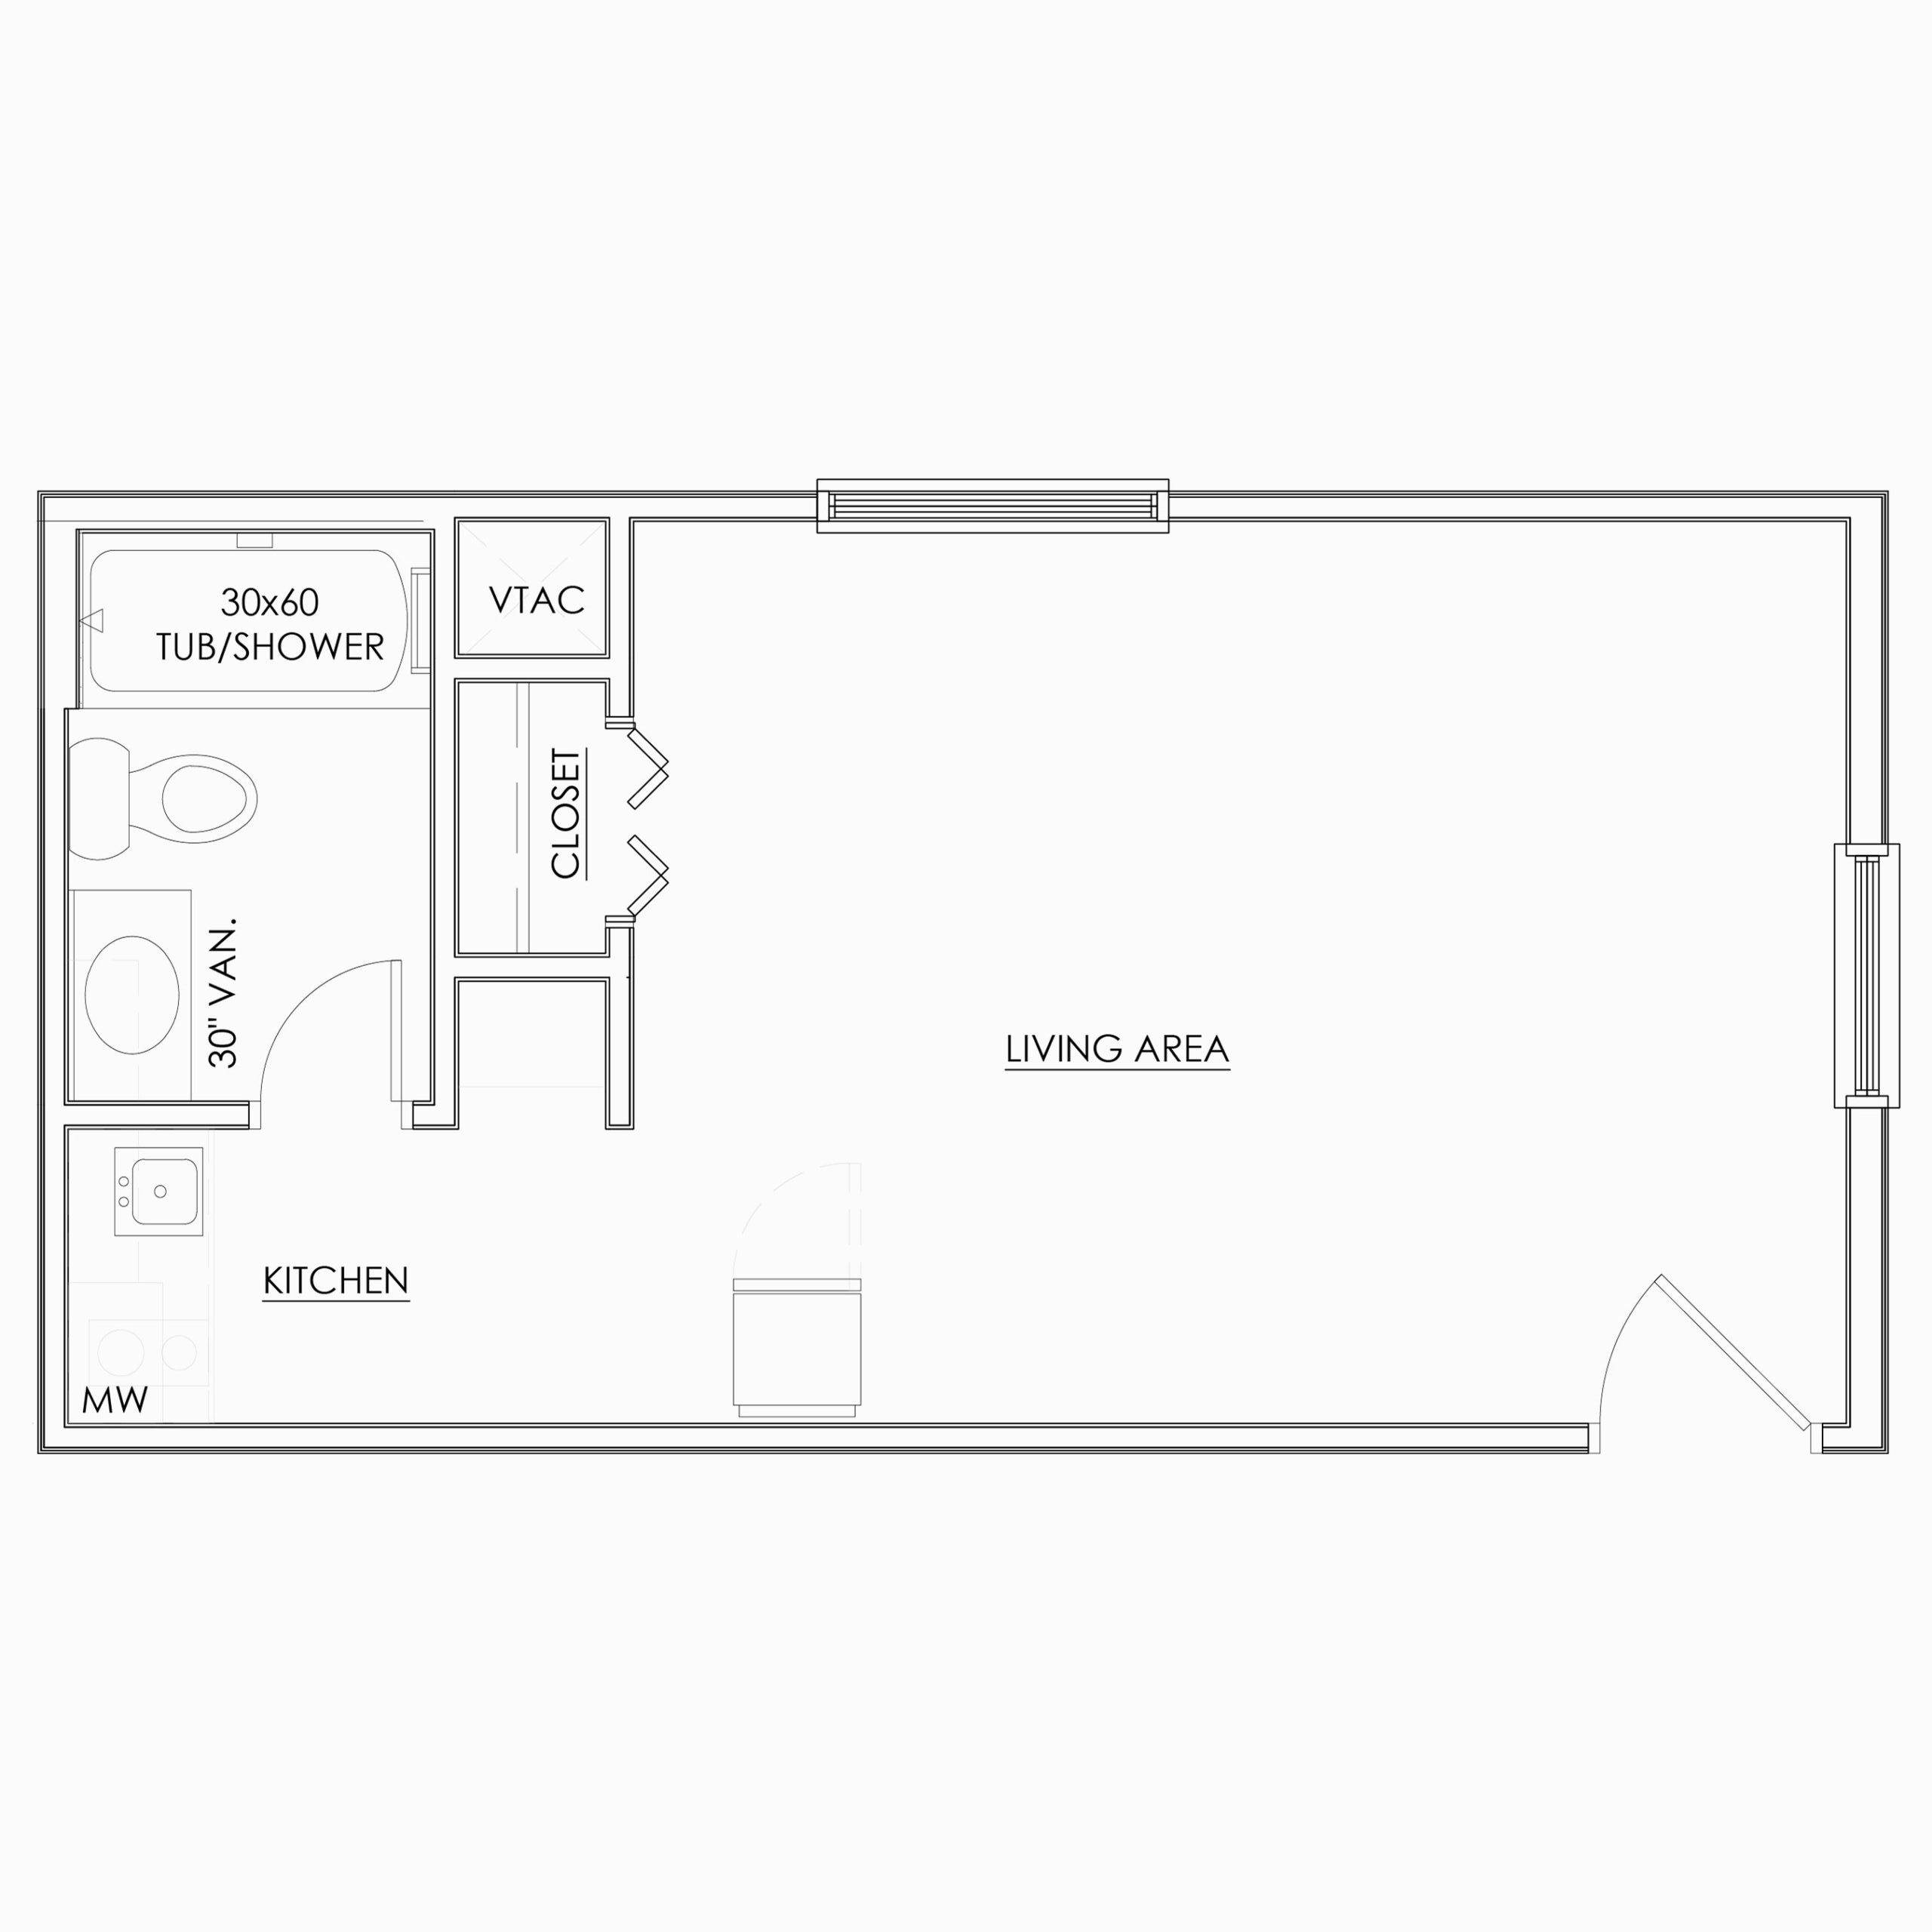 Studio S3 floor Plan with larger living area and separate closet, bathroom, and kitchen area